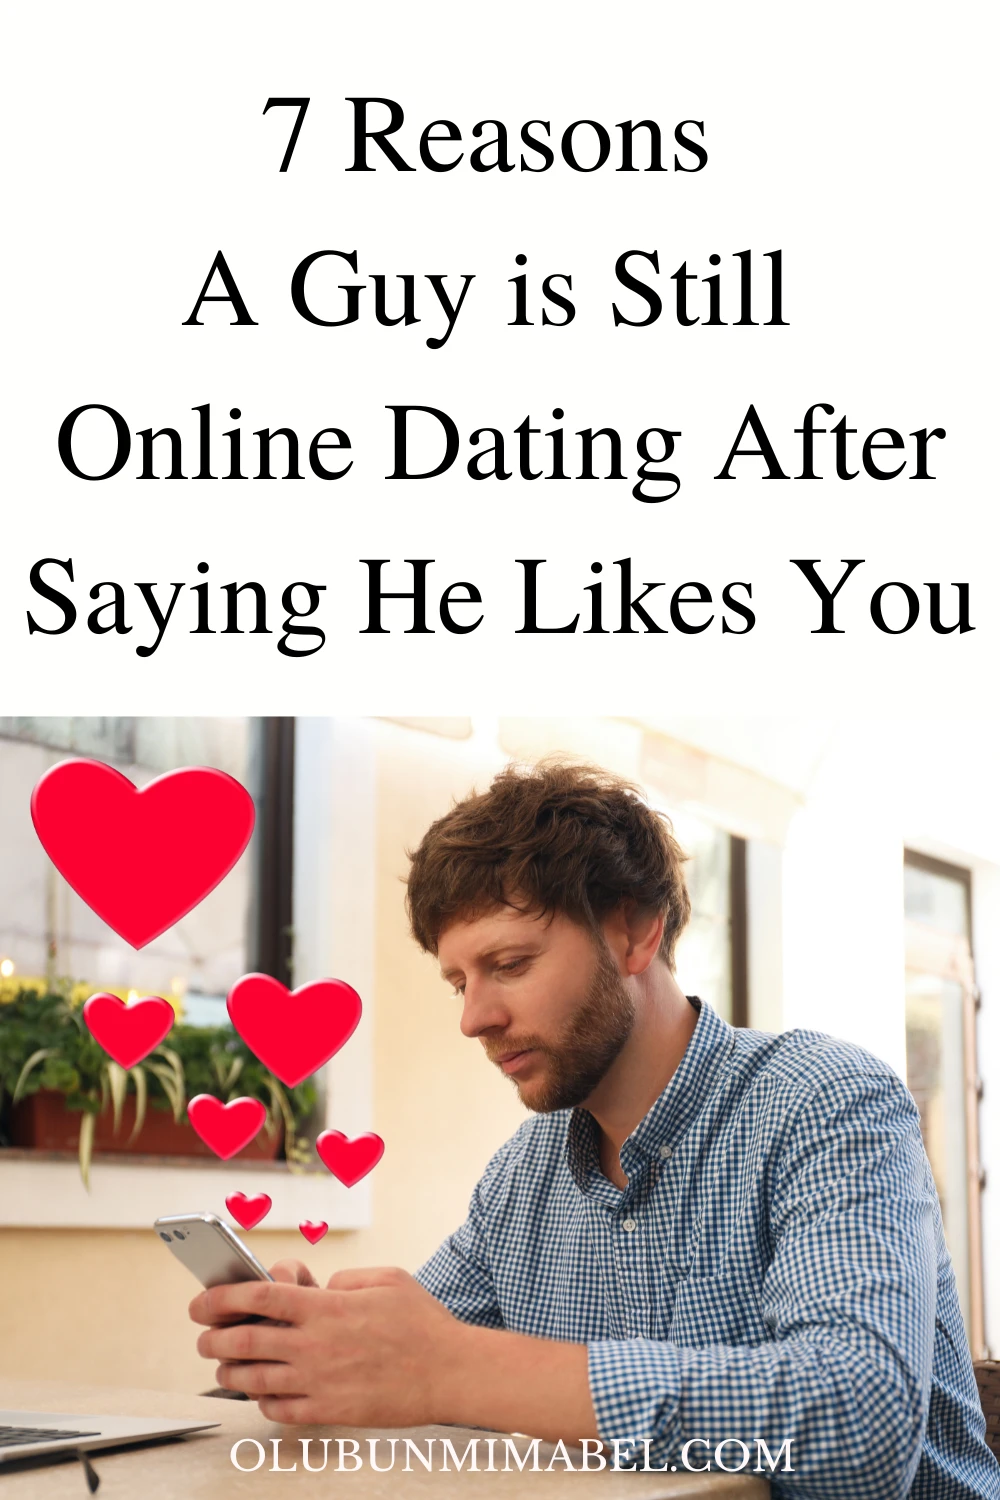 If He Likes Me Why Is He Still Online Dating?